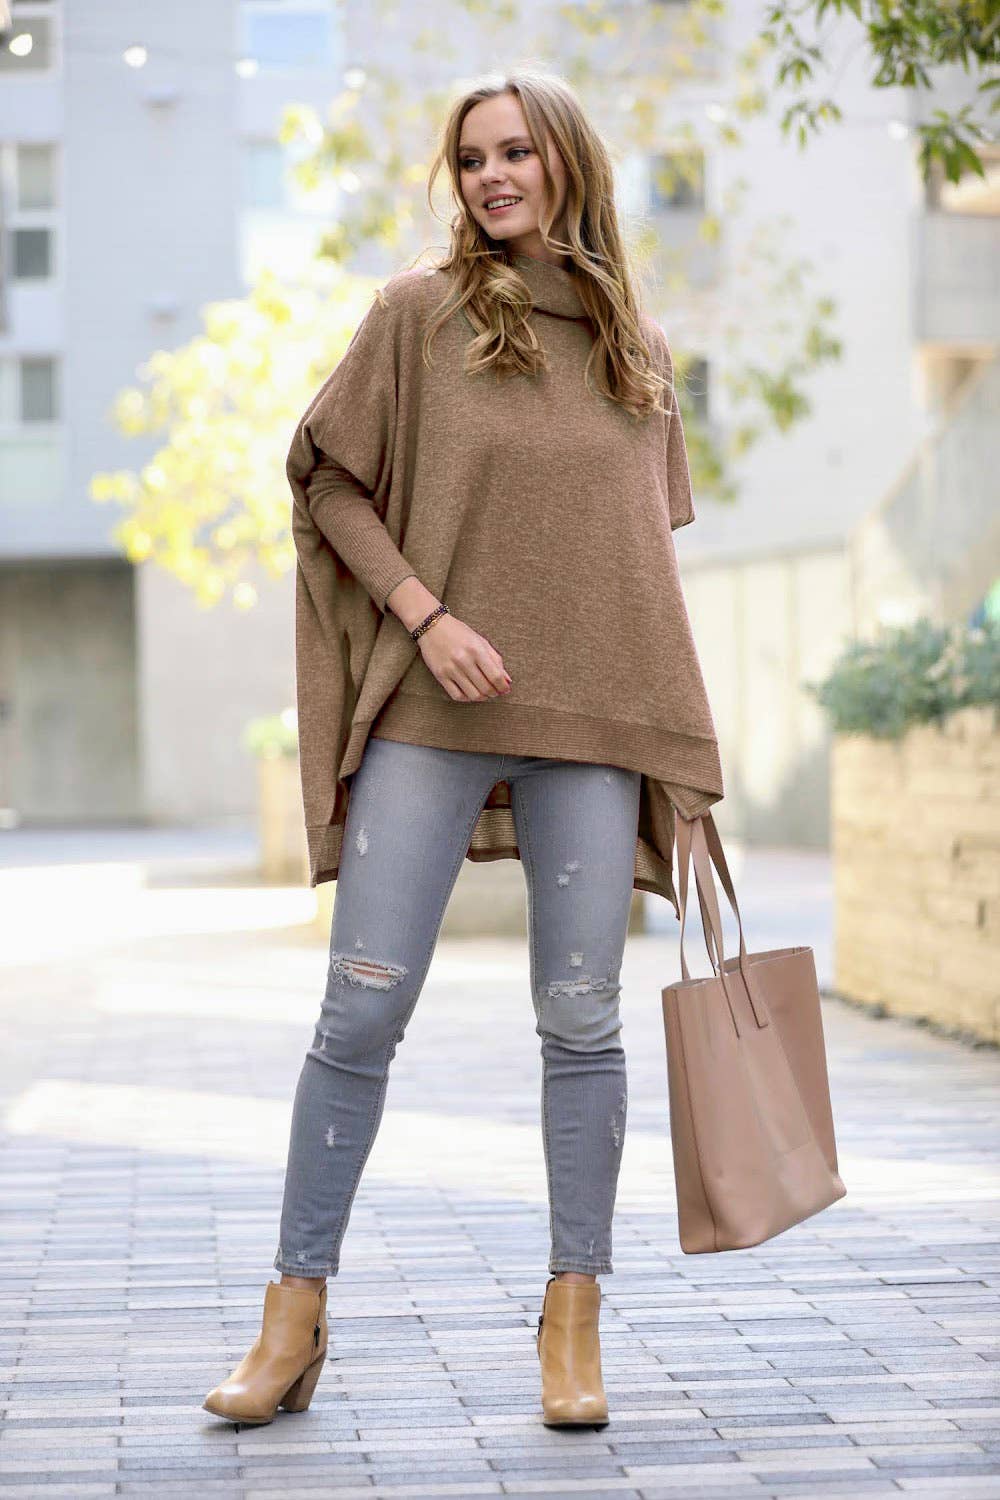 Clearance: Butterorange Cowl Neck Oversized Poncho Hi-low Sweater